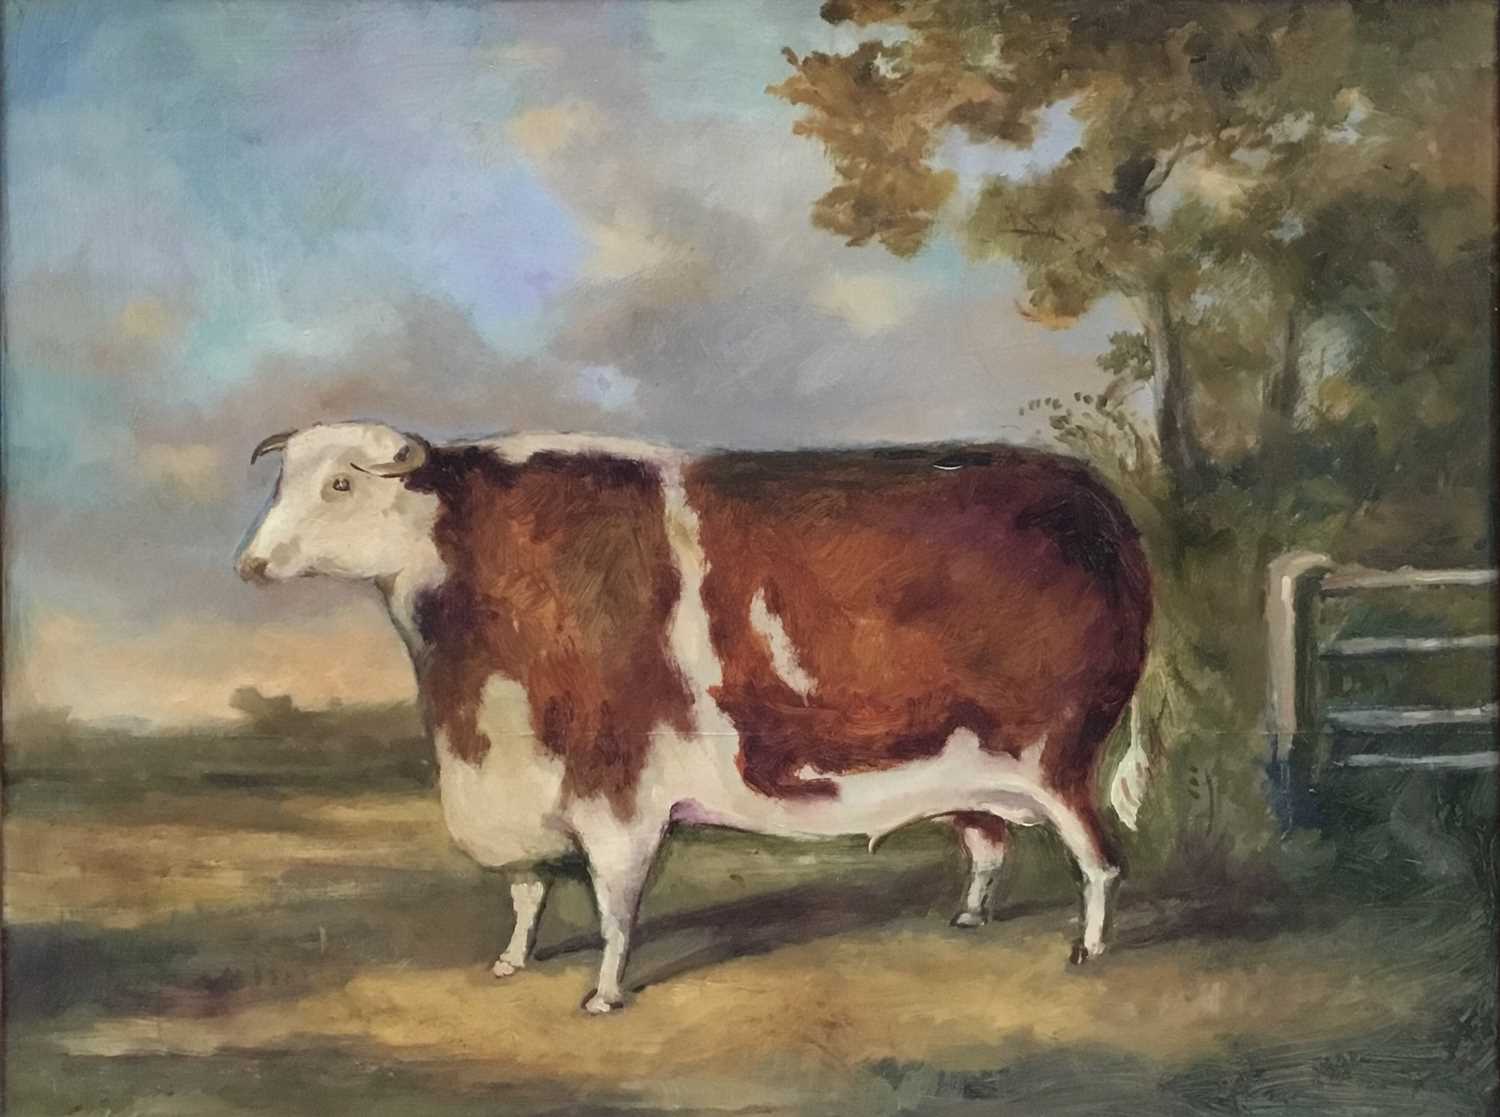 Lot 76 - 19th century style oil on board - specimen bull, 37 x 46cm, in 19th century rosewood frame